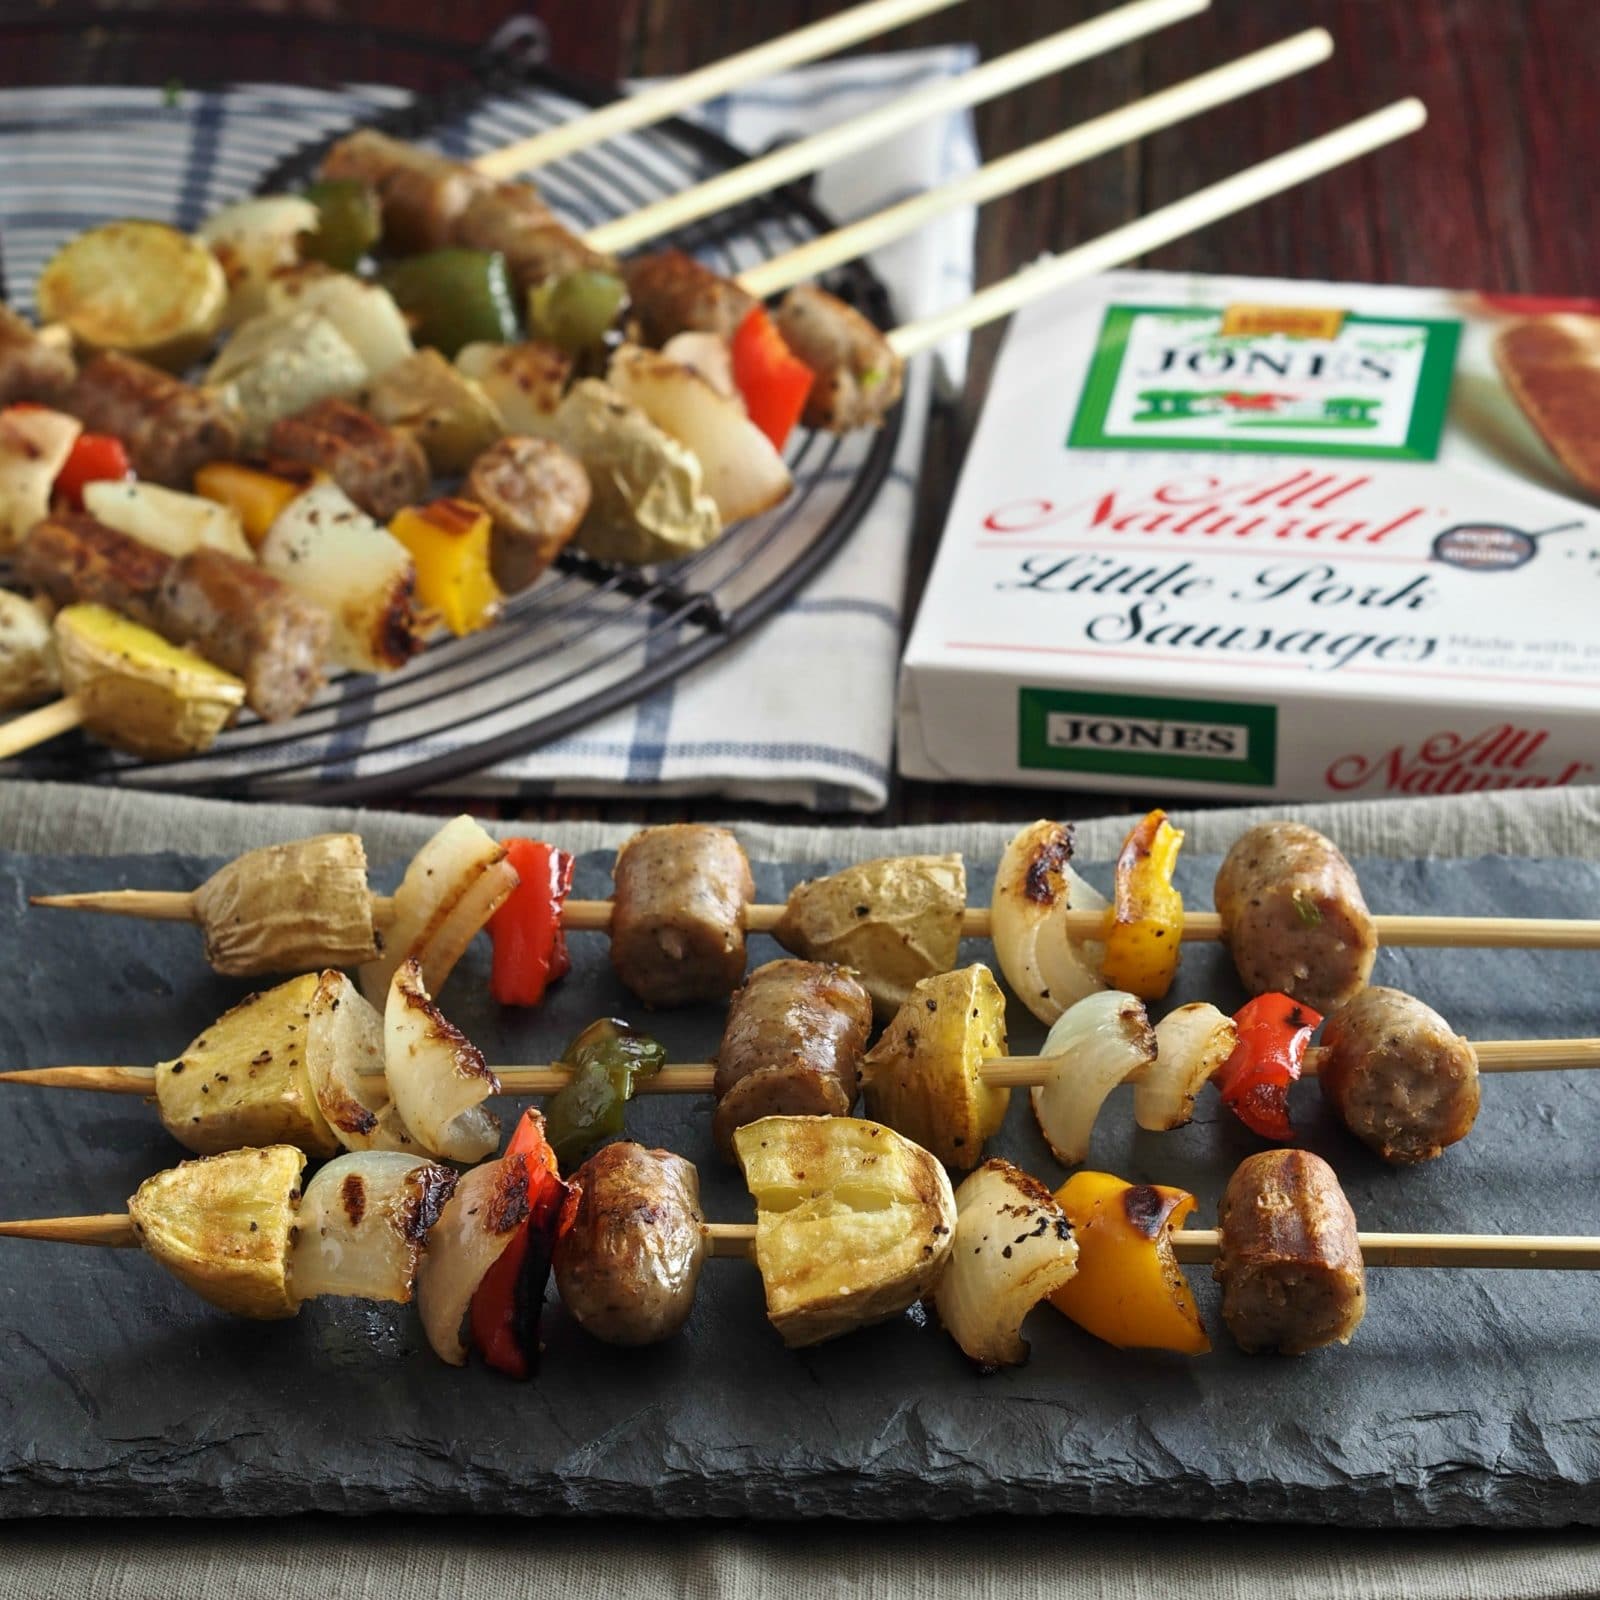 Savory Breakfast Kebabs - Jones Dairy Farm Little Pork Sausages, roasted sweet peppers, onions & peppers threaded on bamboo skewers. Breakfast-on-a-stick. Simply Sated